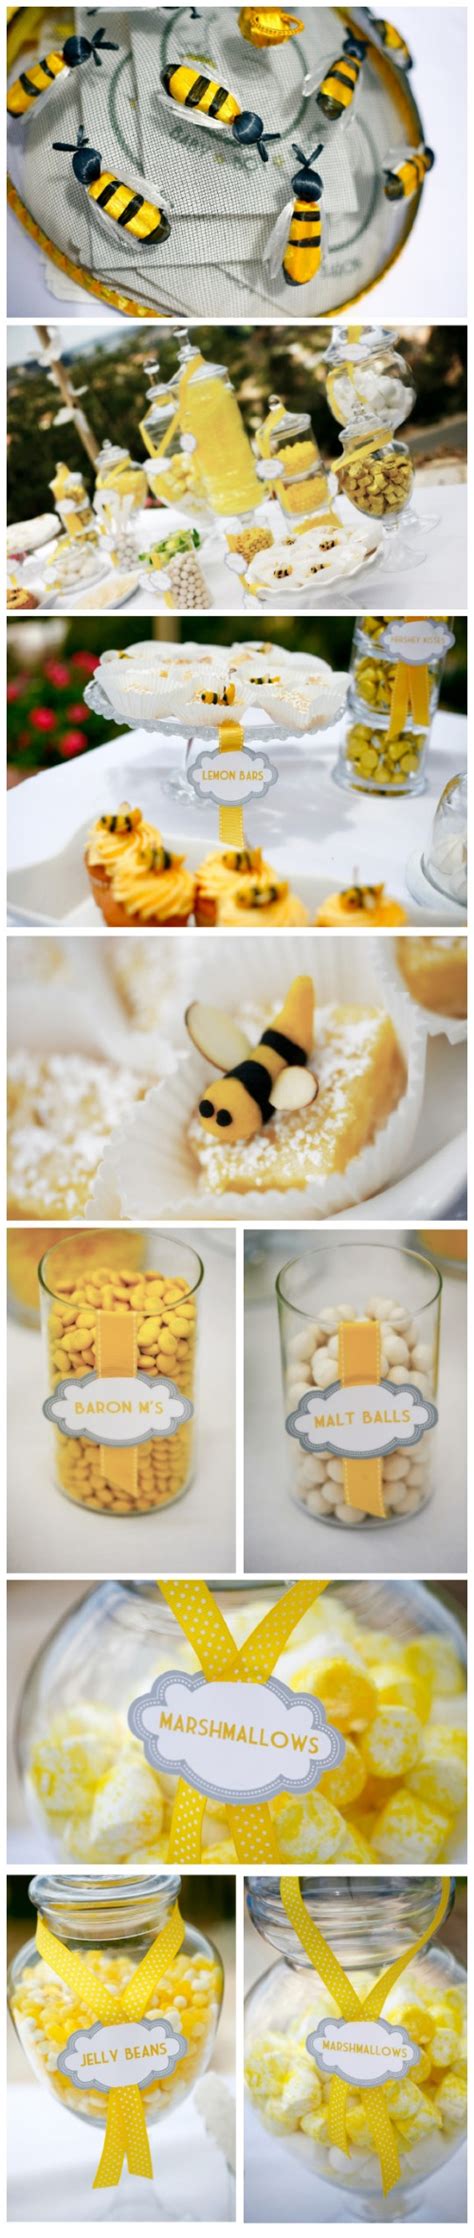 Explore our wide assortment of themes today. boy baby shower - bumble bee theme (I like it for a spring ...